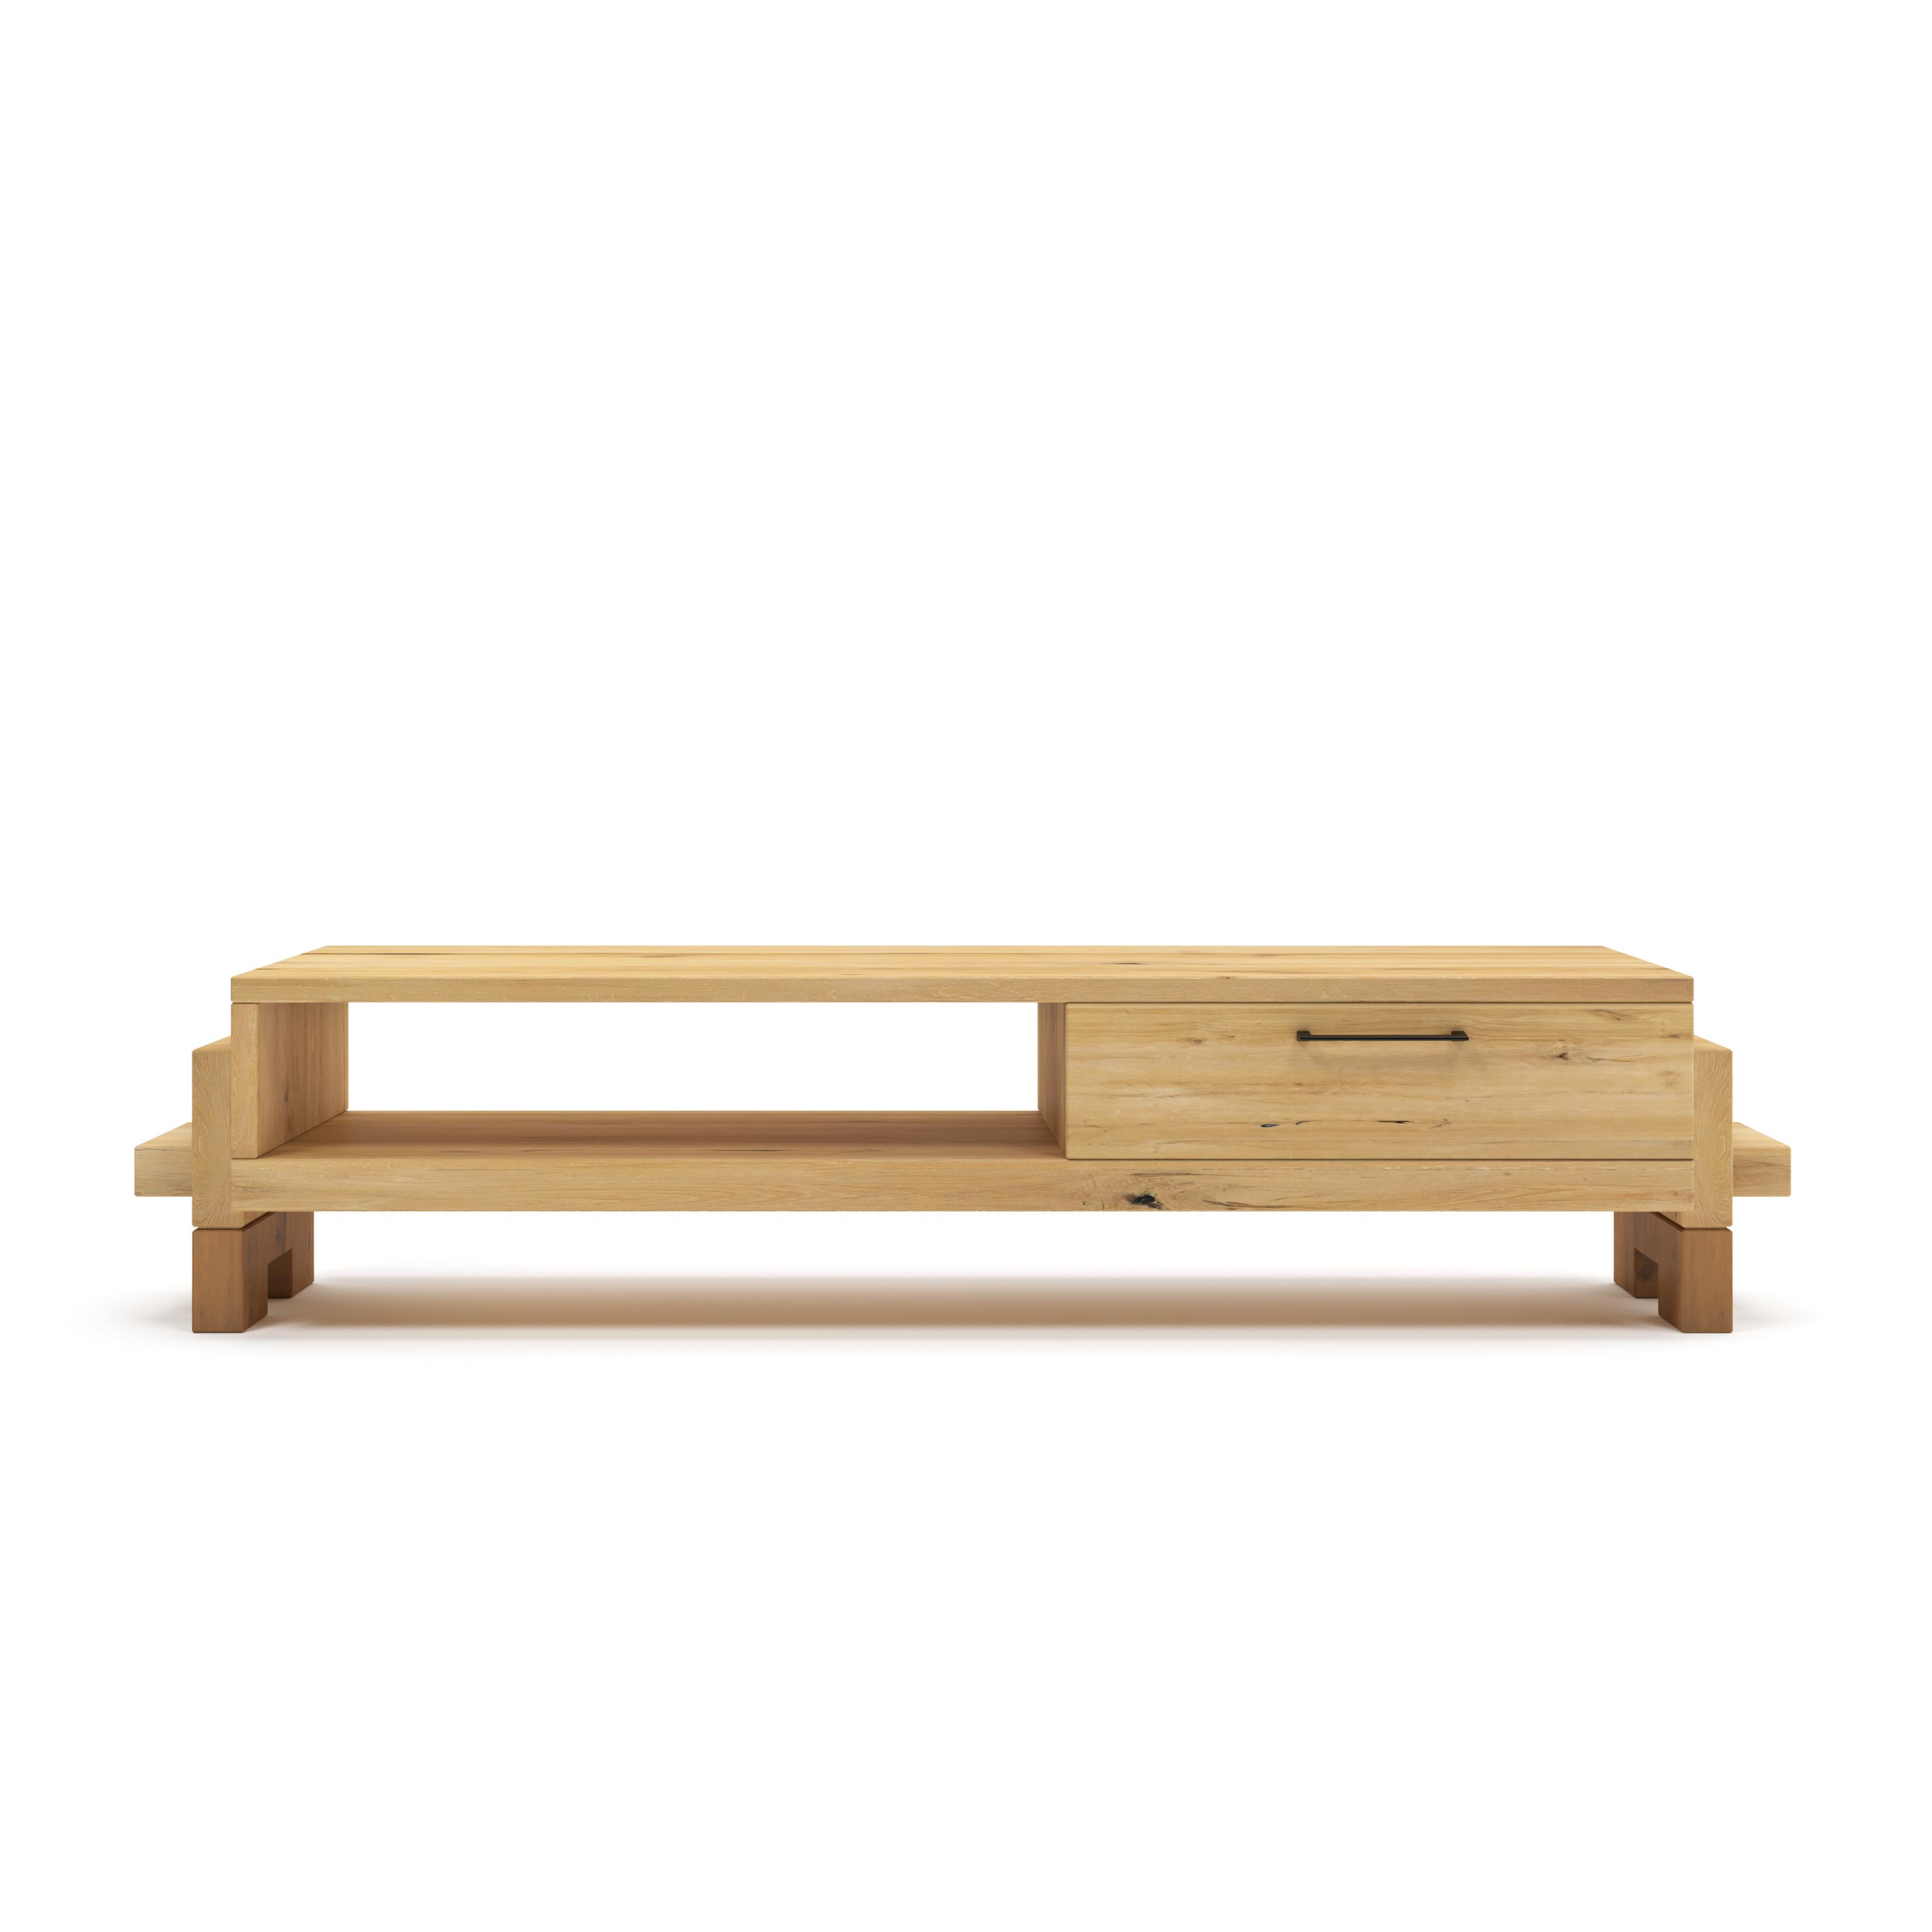 Introducing the Piatra-TV Unit: the perfect addition to any living room. This beautiful piece boasts a drawer for storage, crafted from durable massive wood for a timeless look. Add beauty  and functionality to your home - get the Piatra-TV Unit